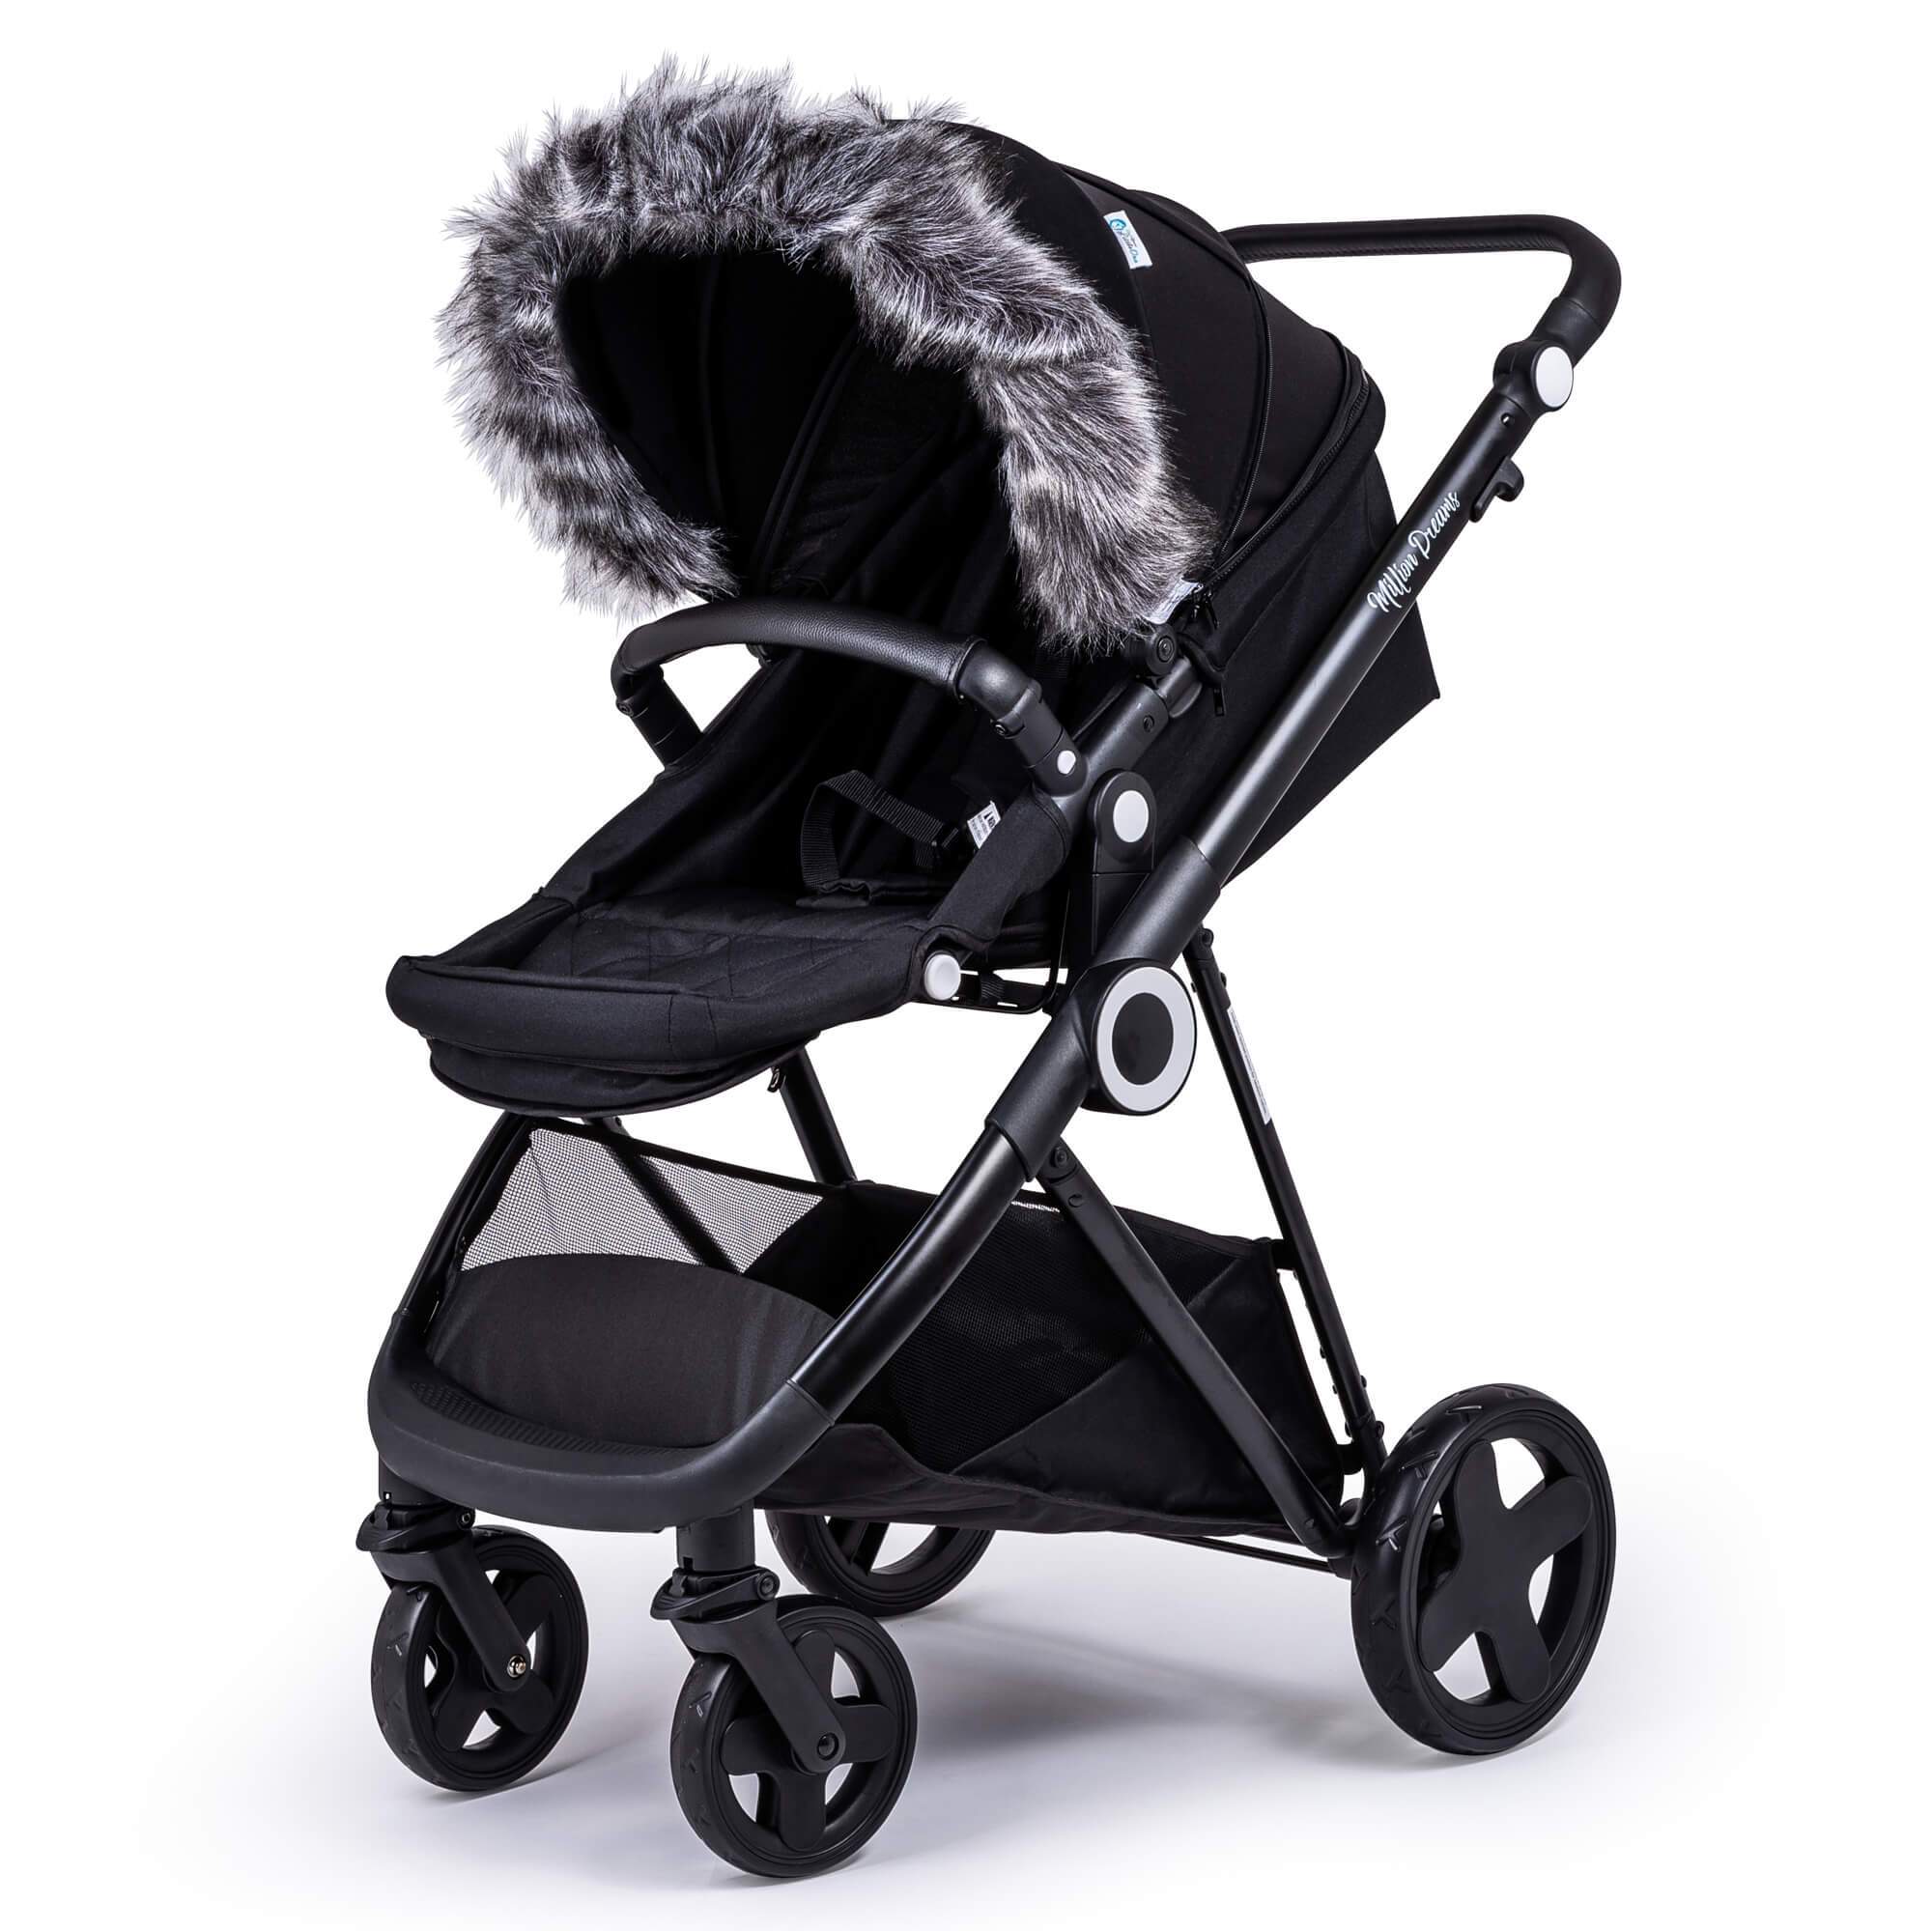 Pram Fur Hood Trim Attachment for Pushchair Compatible with Brevi - Dark Grey / Fits All Models | For Your Little One